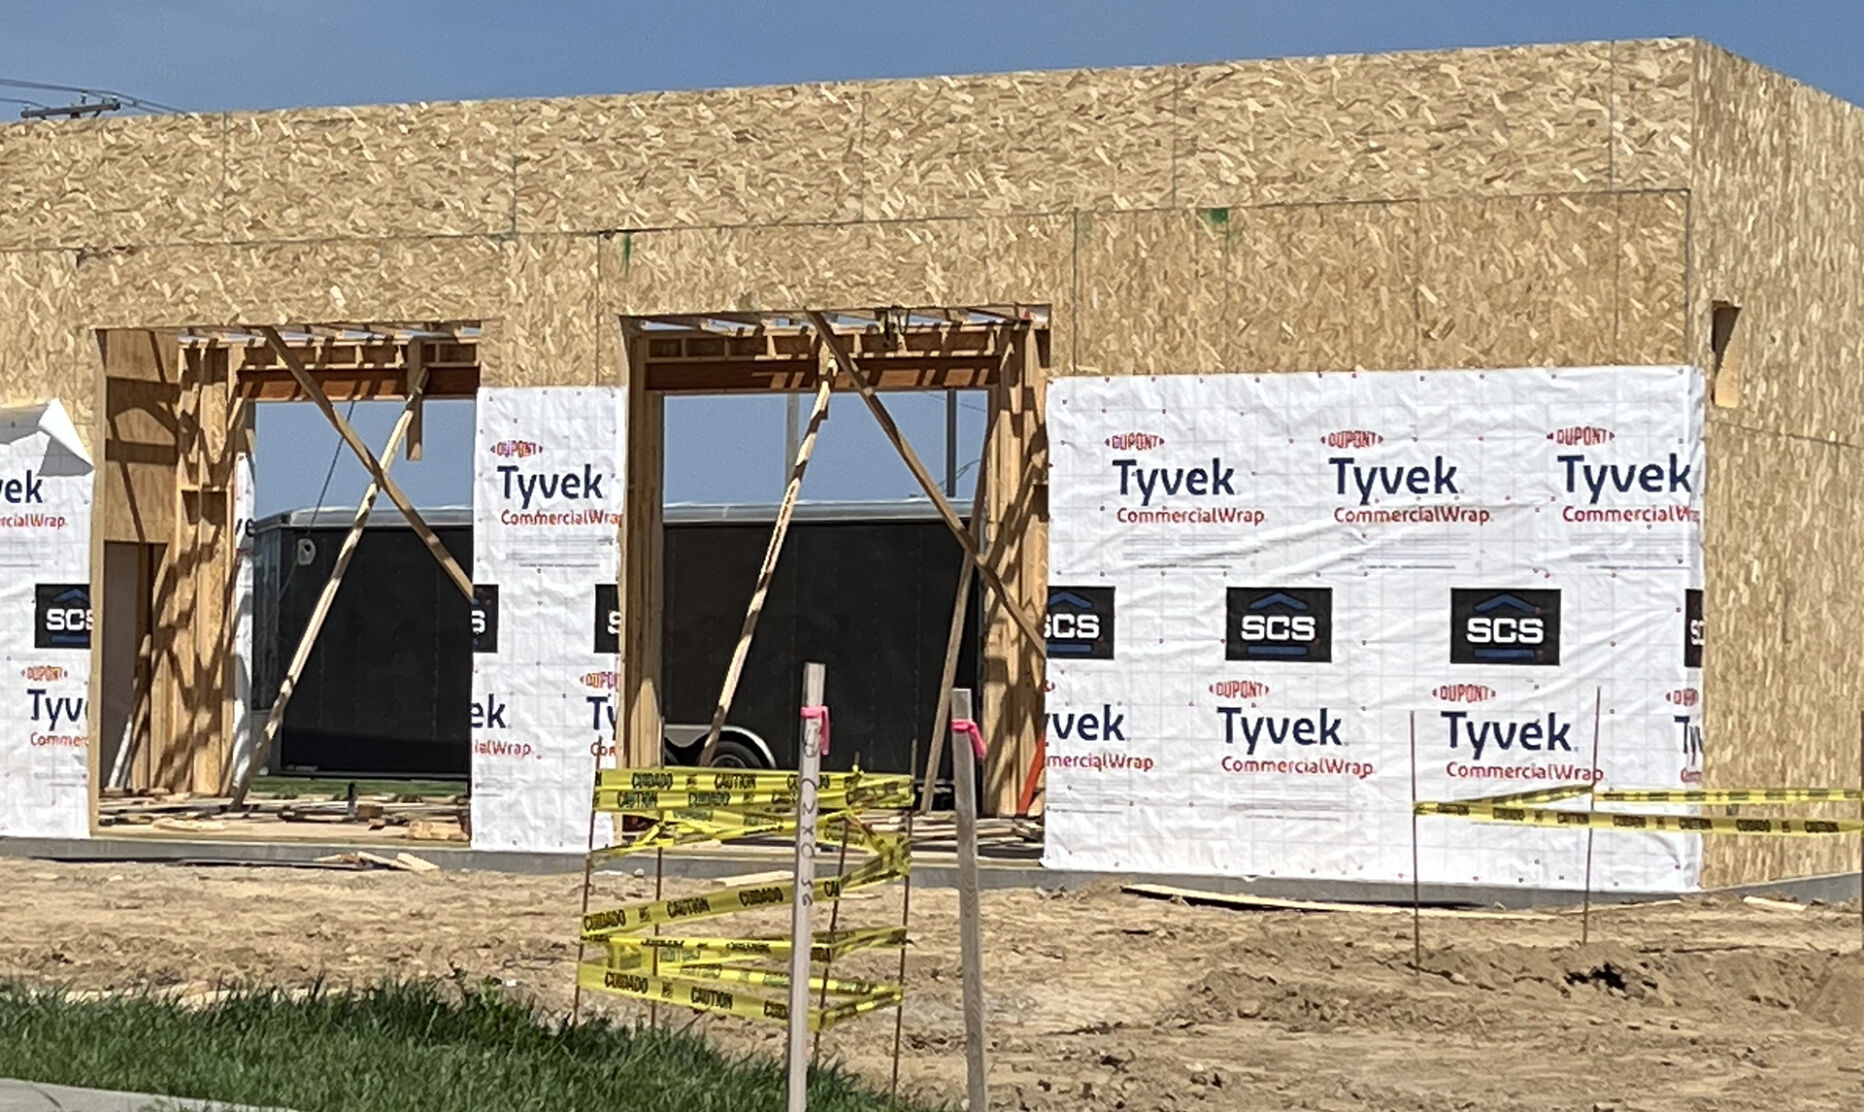 Take 5 starts construction in Papillion pic